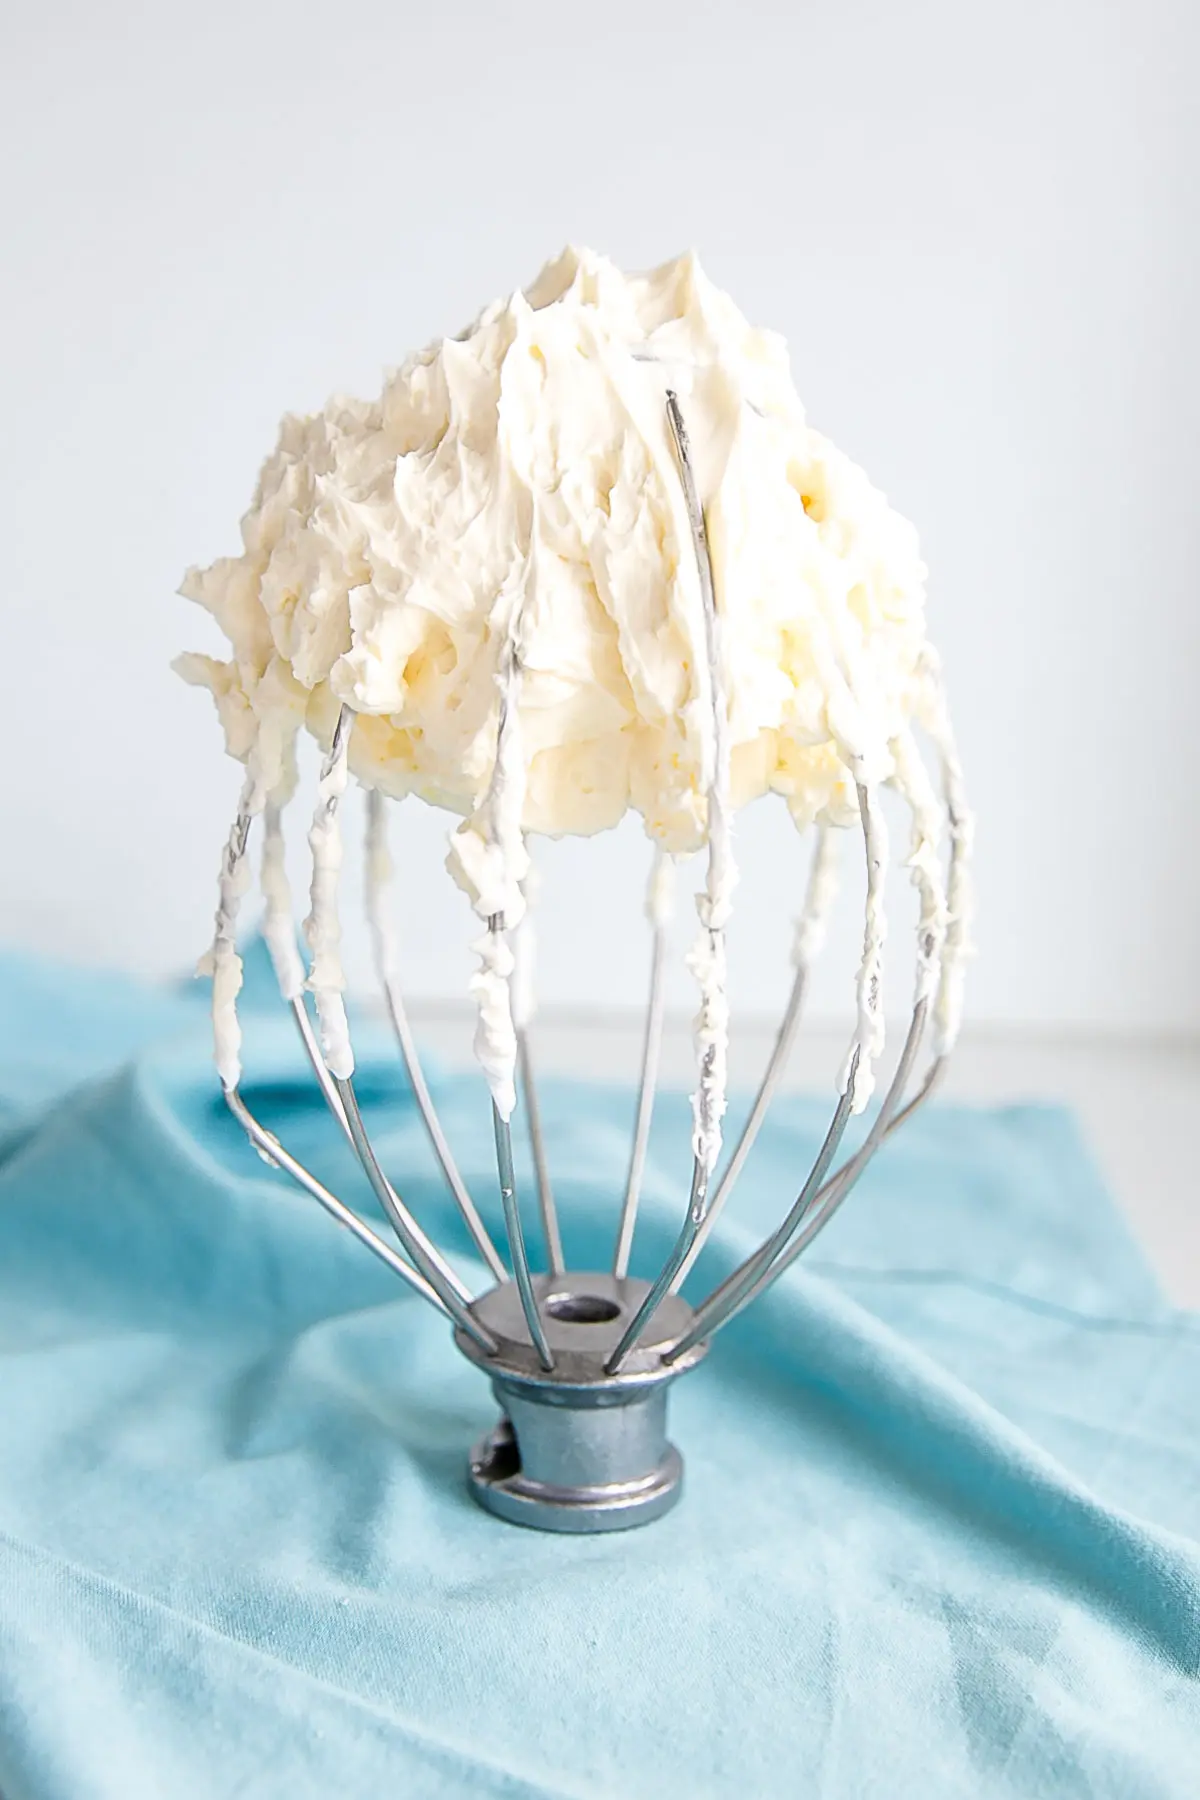 Swiss meringue buttercream on a whisk different angle.